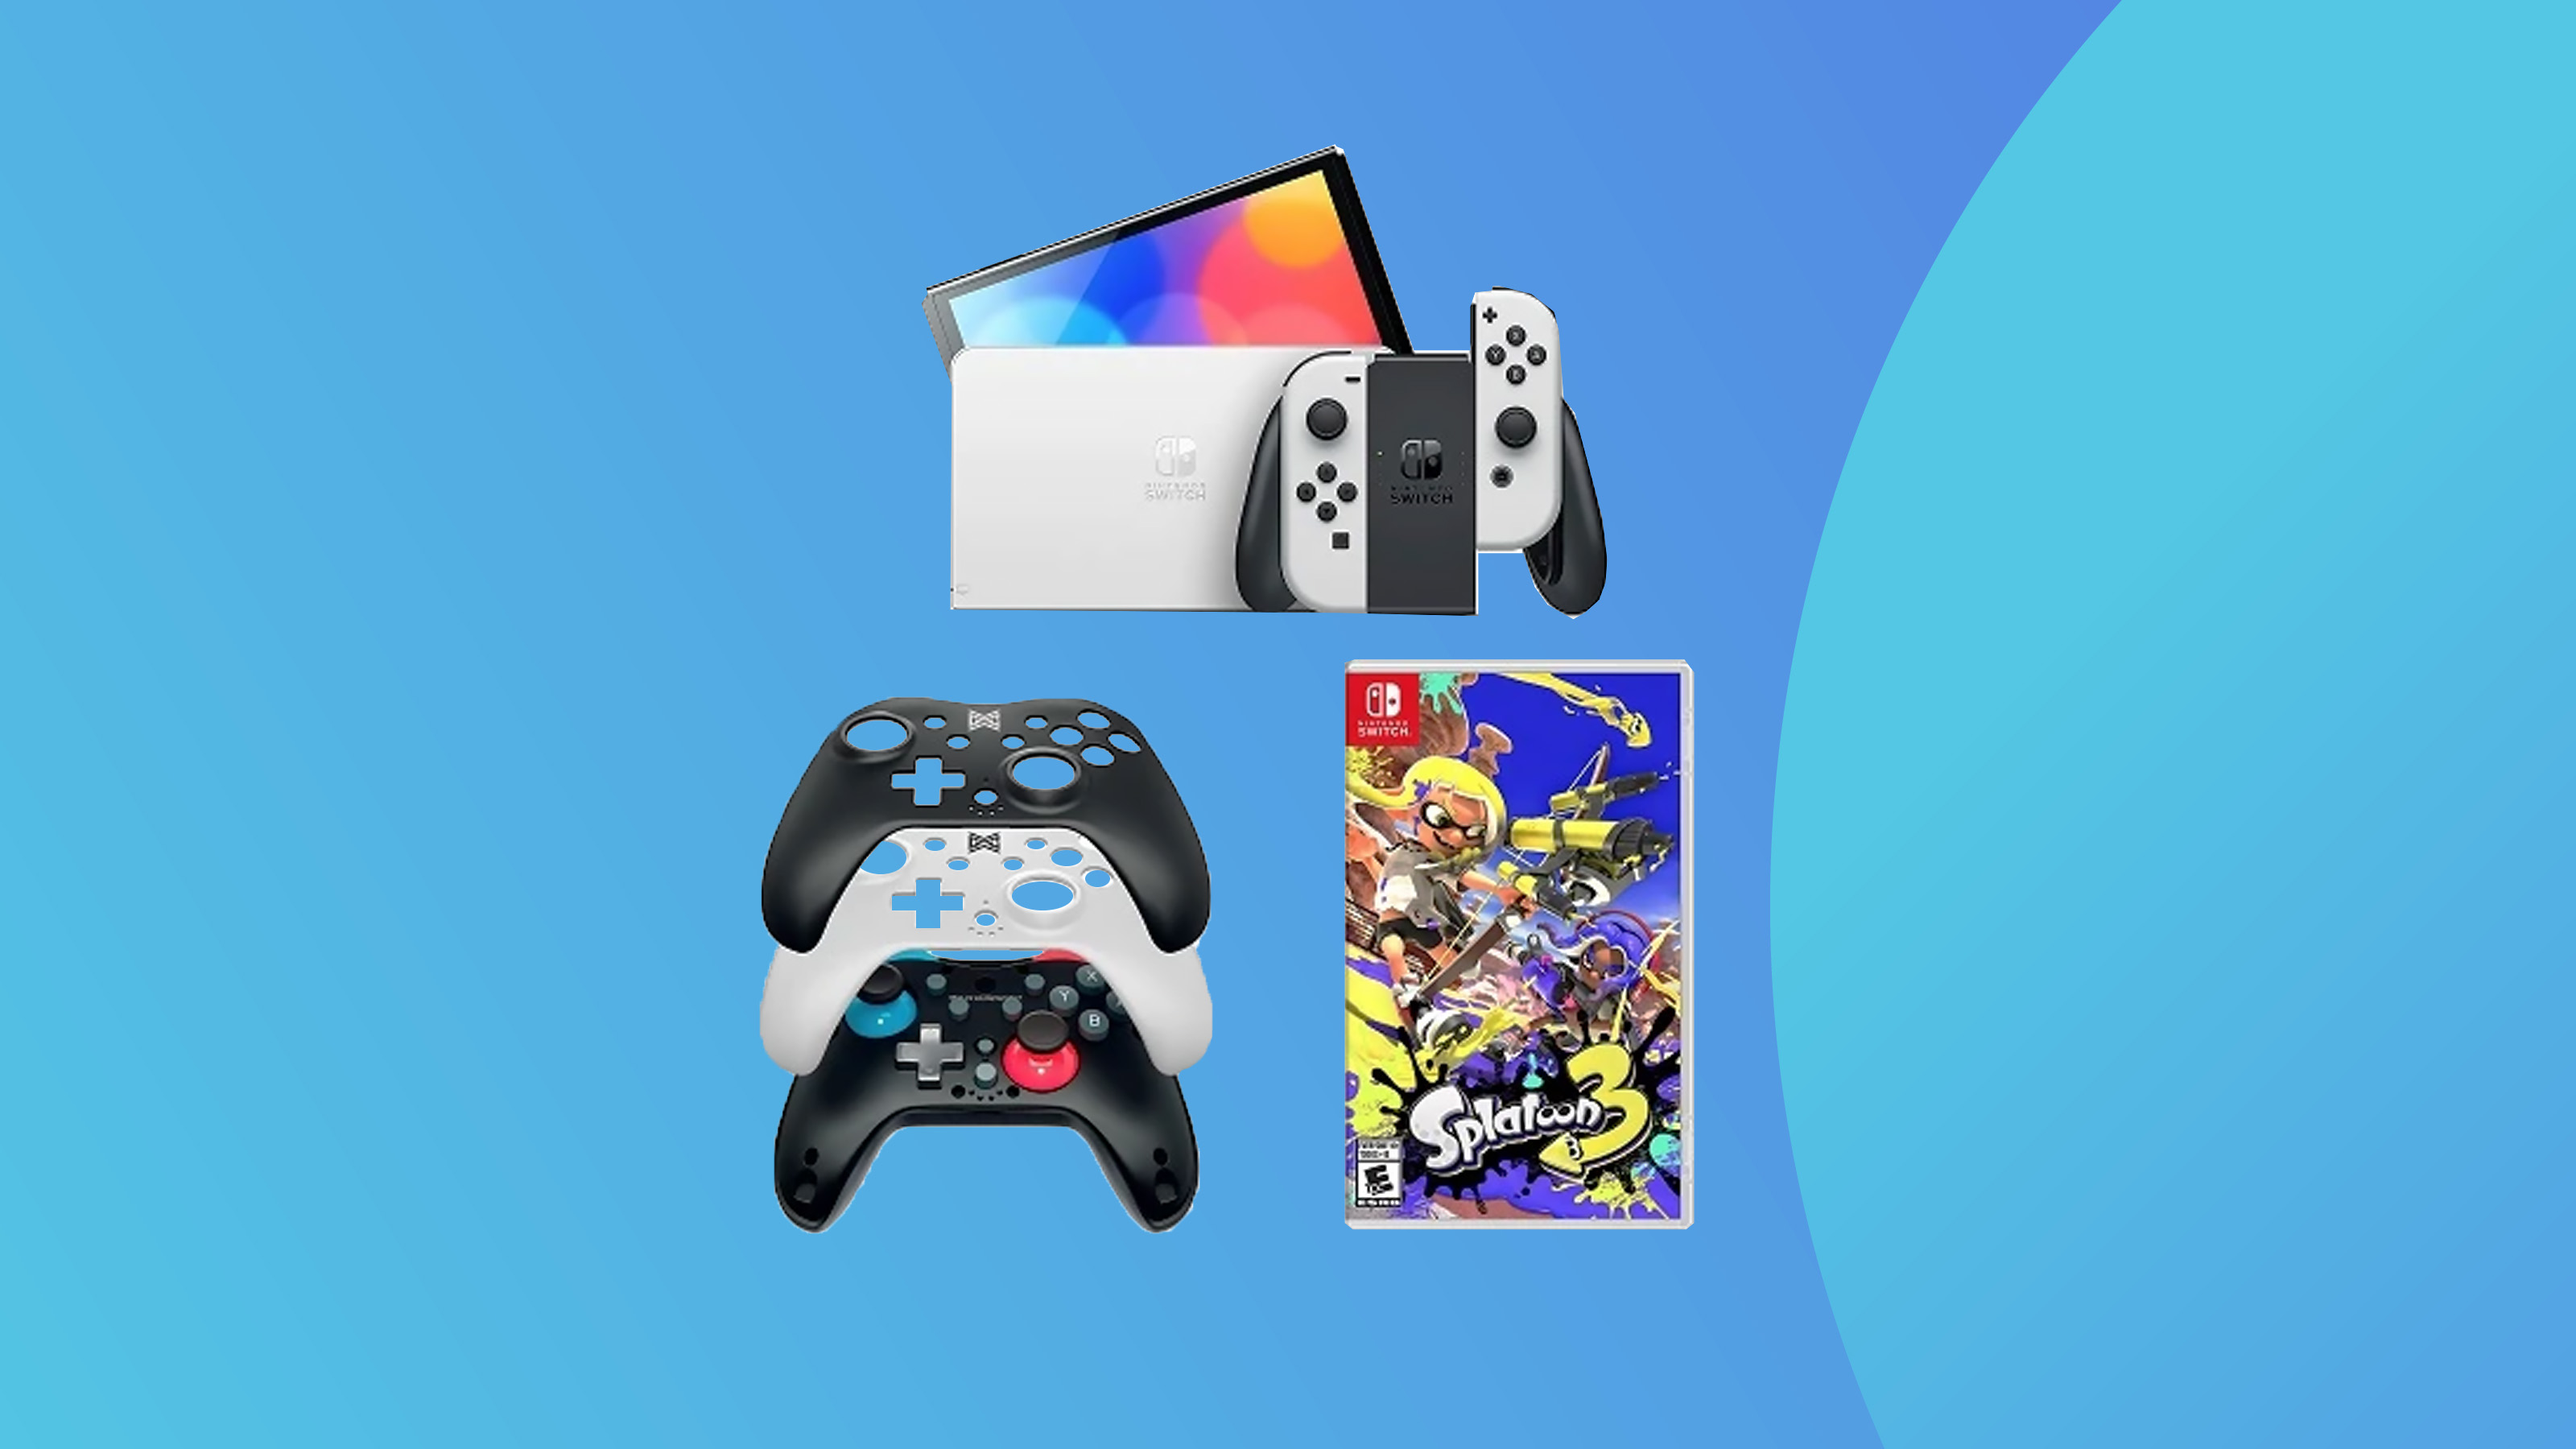 A product shot of the Switch Oled and accessories on a colorful background